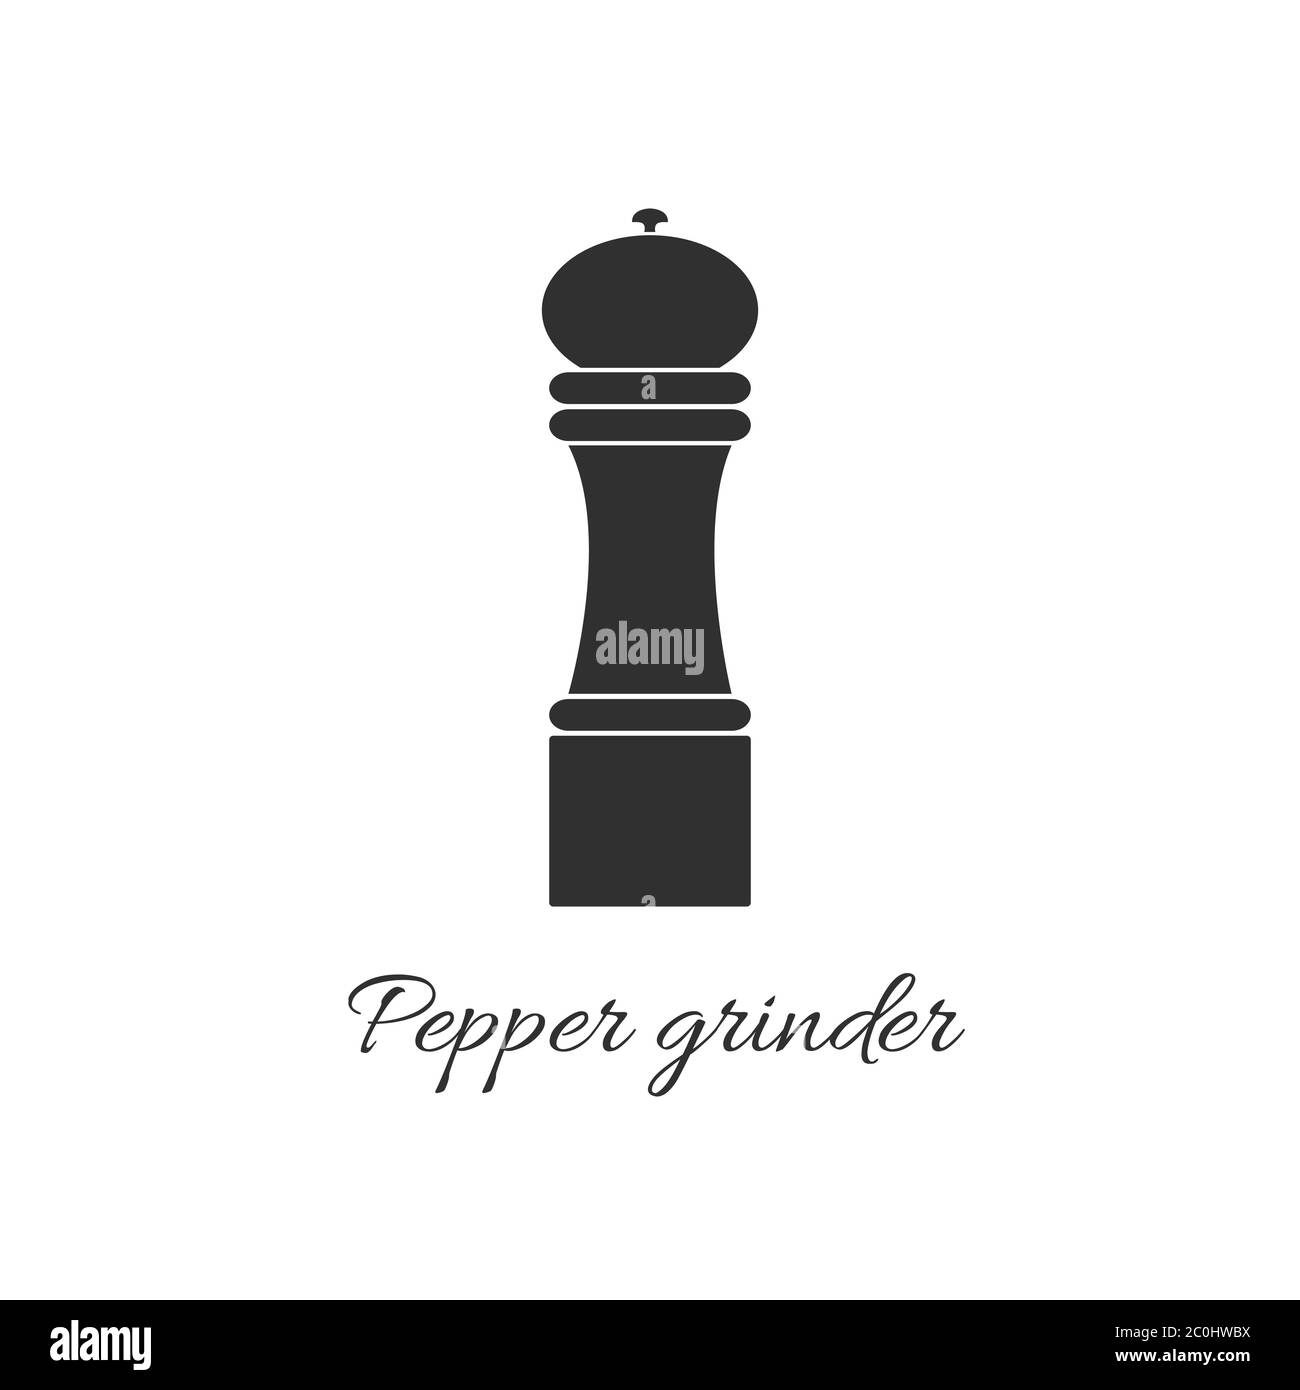 pepper grinder, salt spice shaker, black pepper mill vector simple flat icon. Seasoning hand grinder. Restaurant kitchen tool. isolated graphic Stock Vector